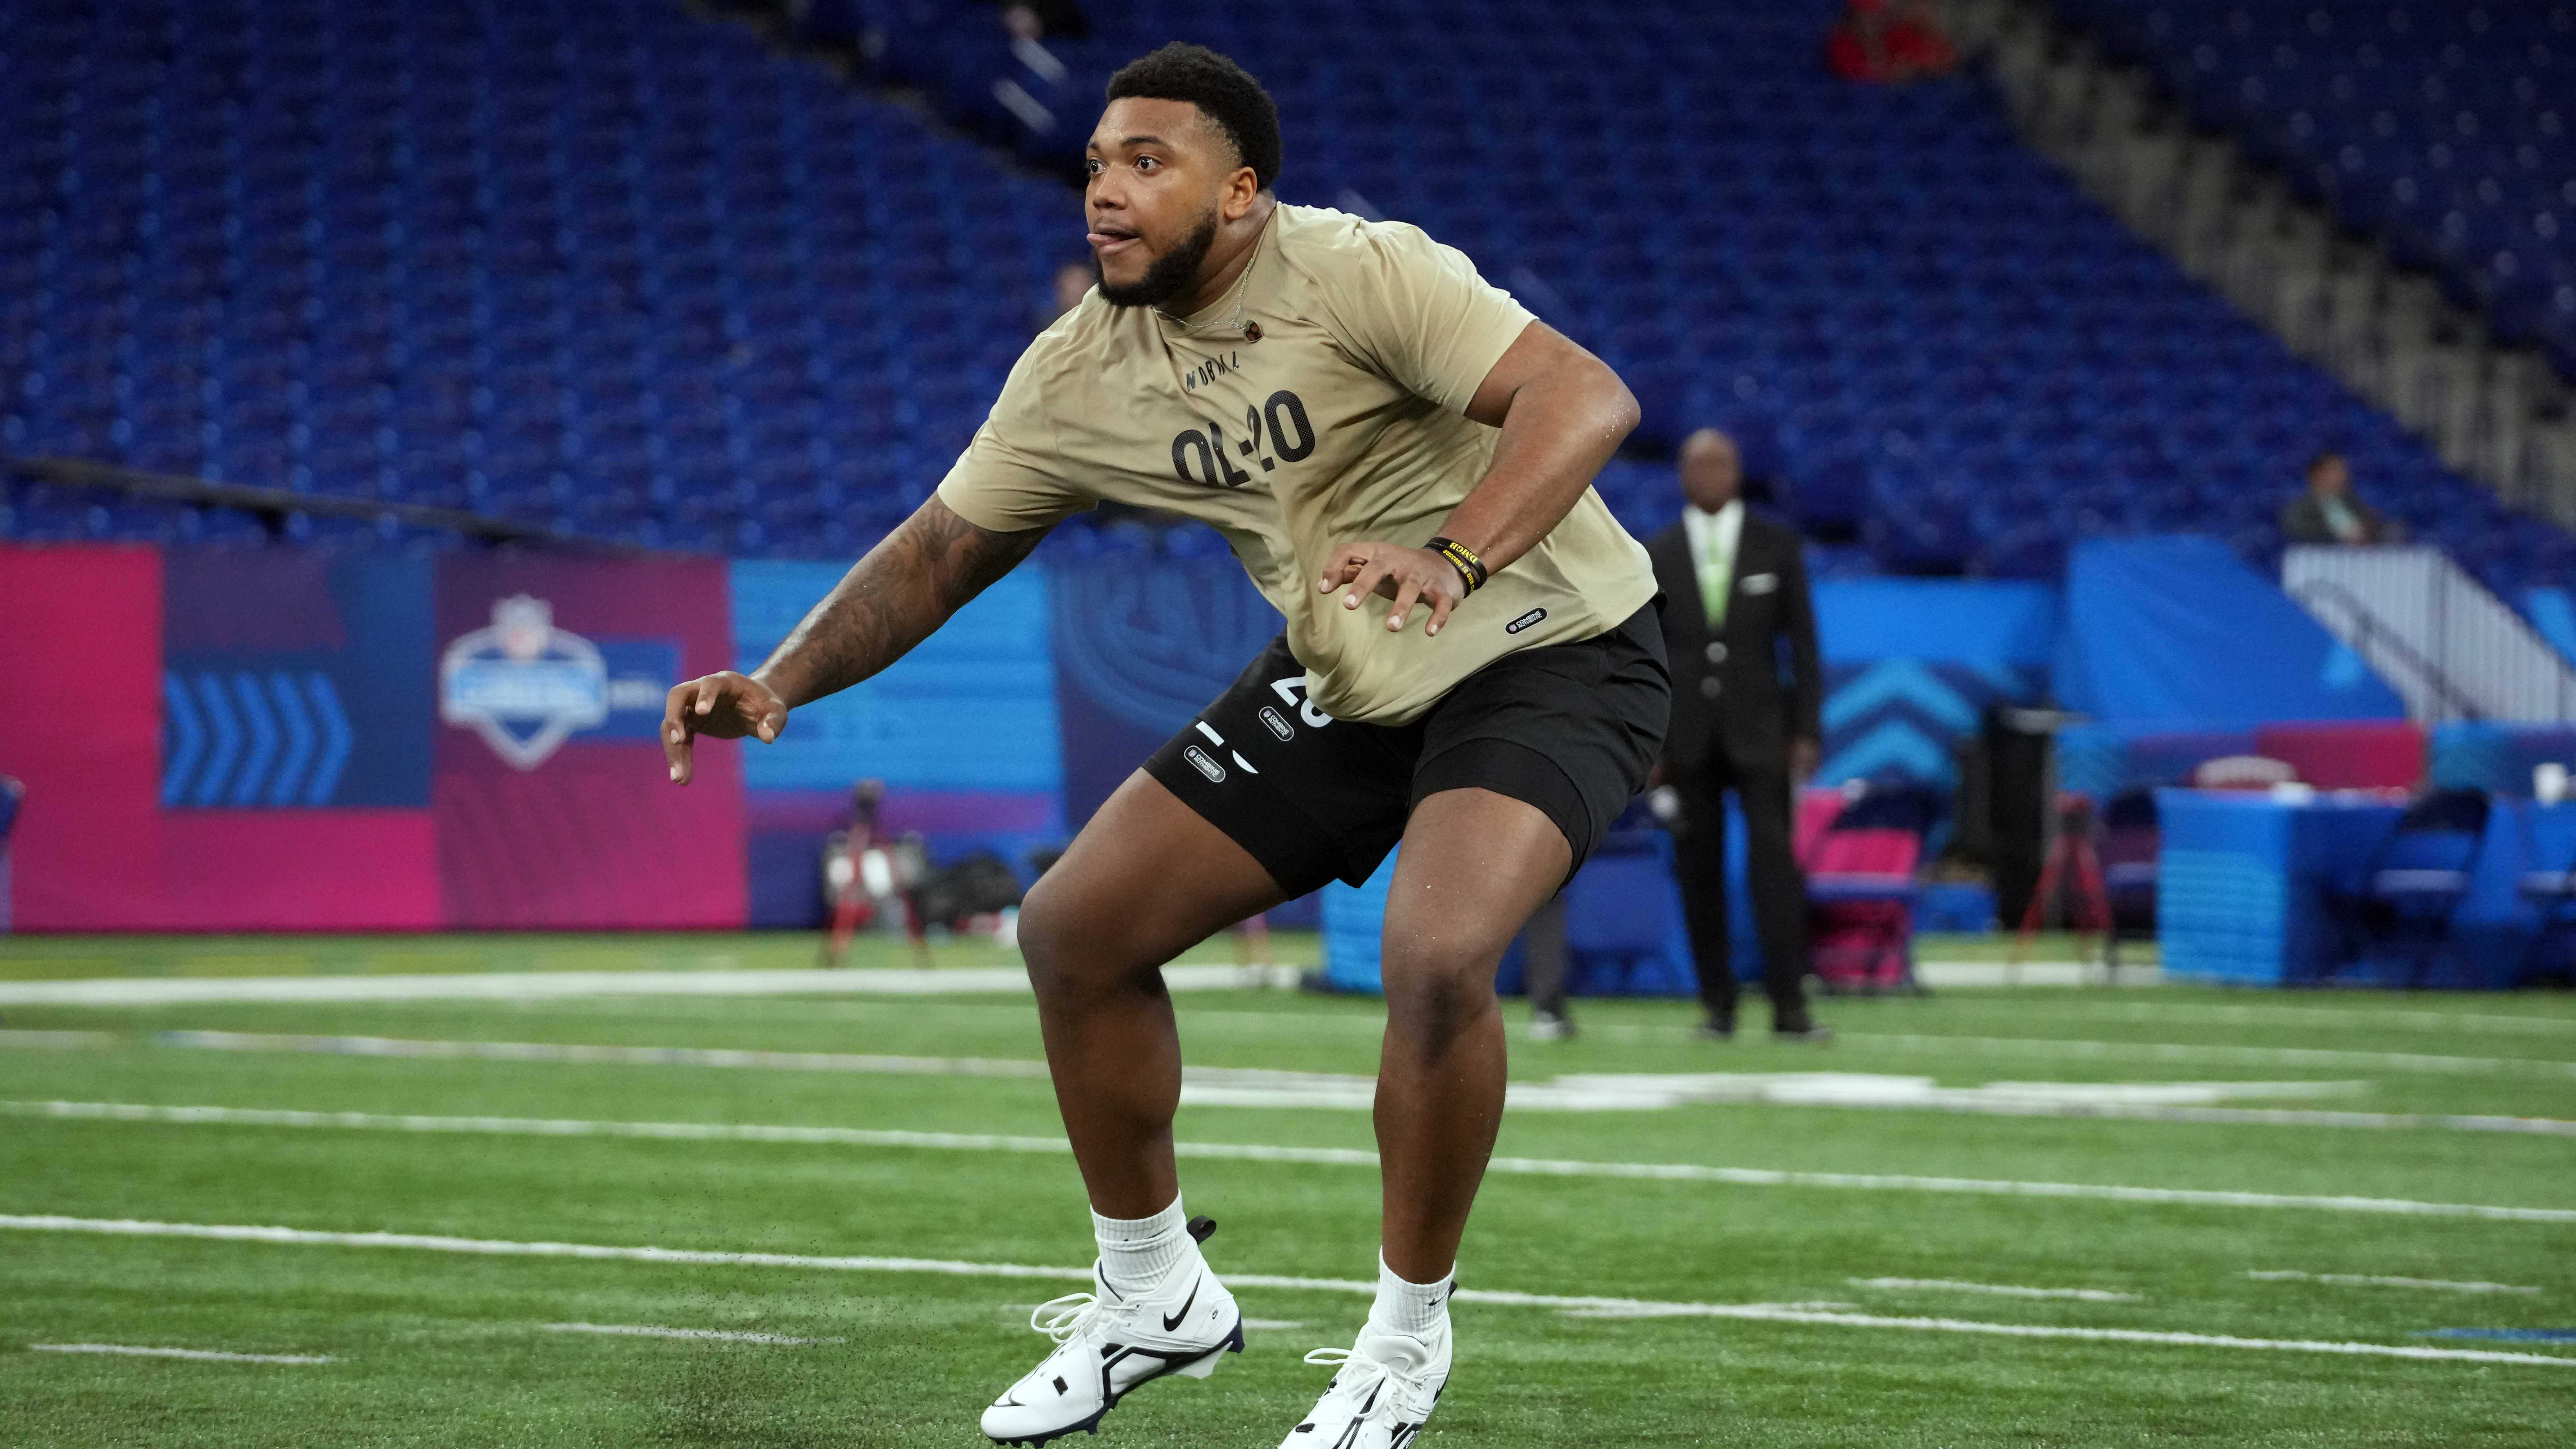 Texans Draft OT Blake Fisher From Notre Dame at Pick No. 59